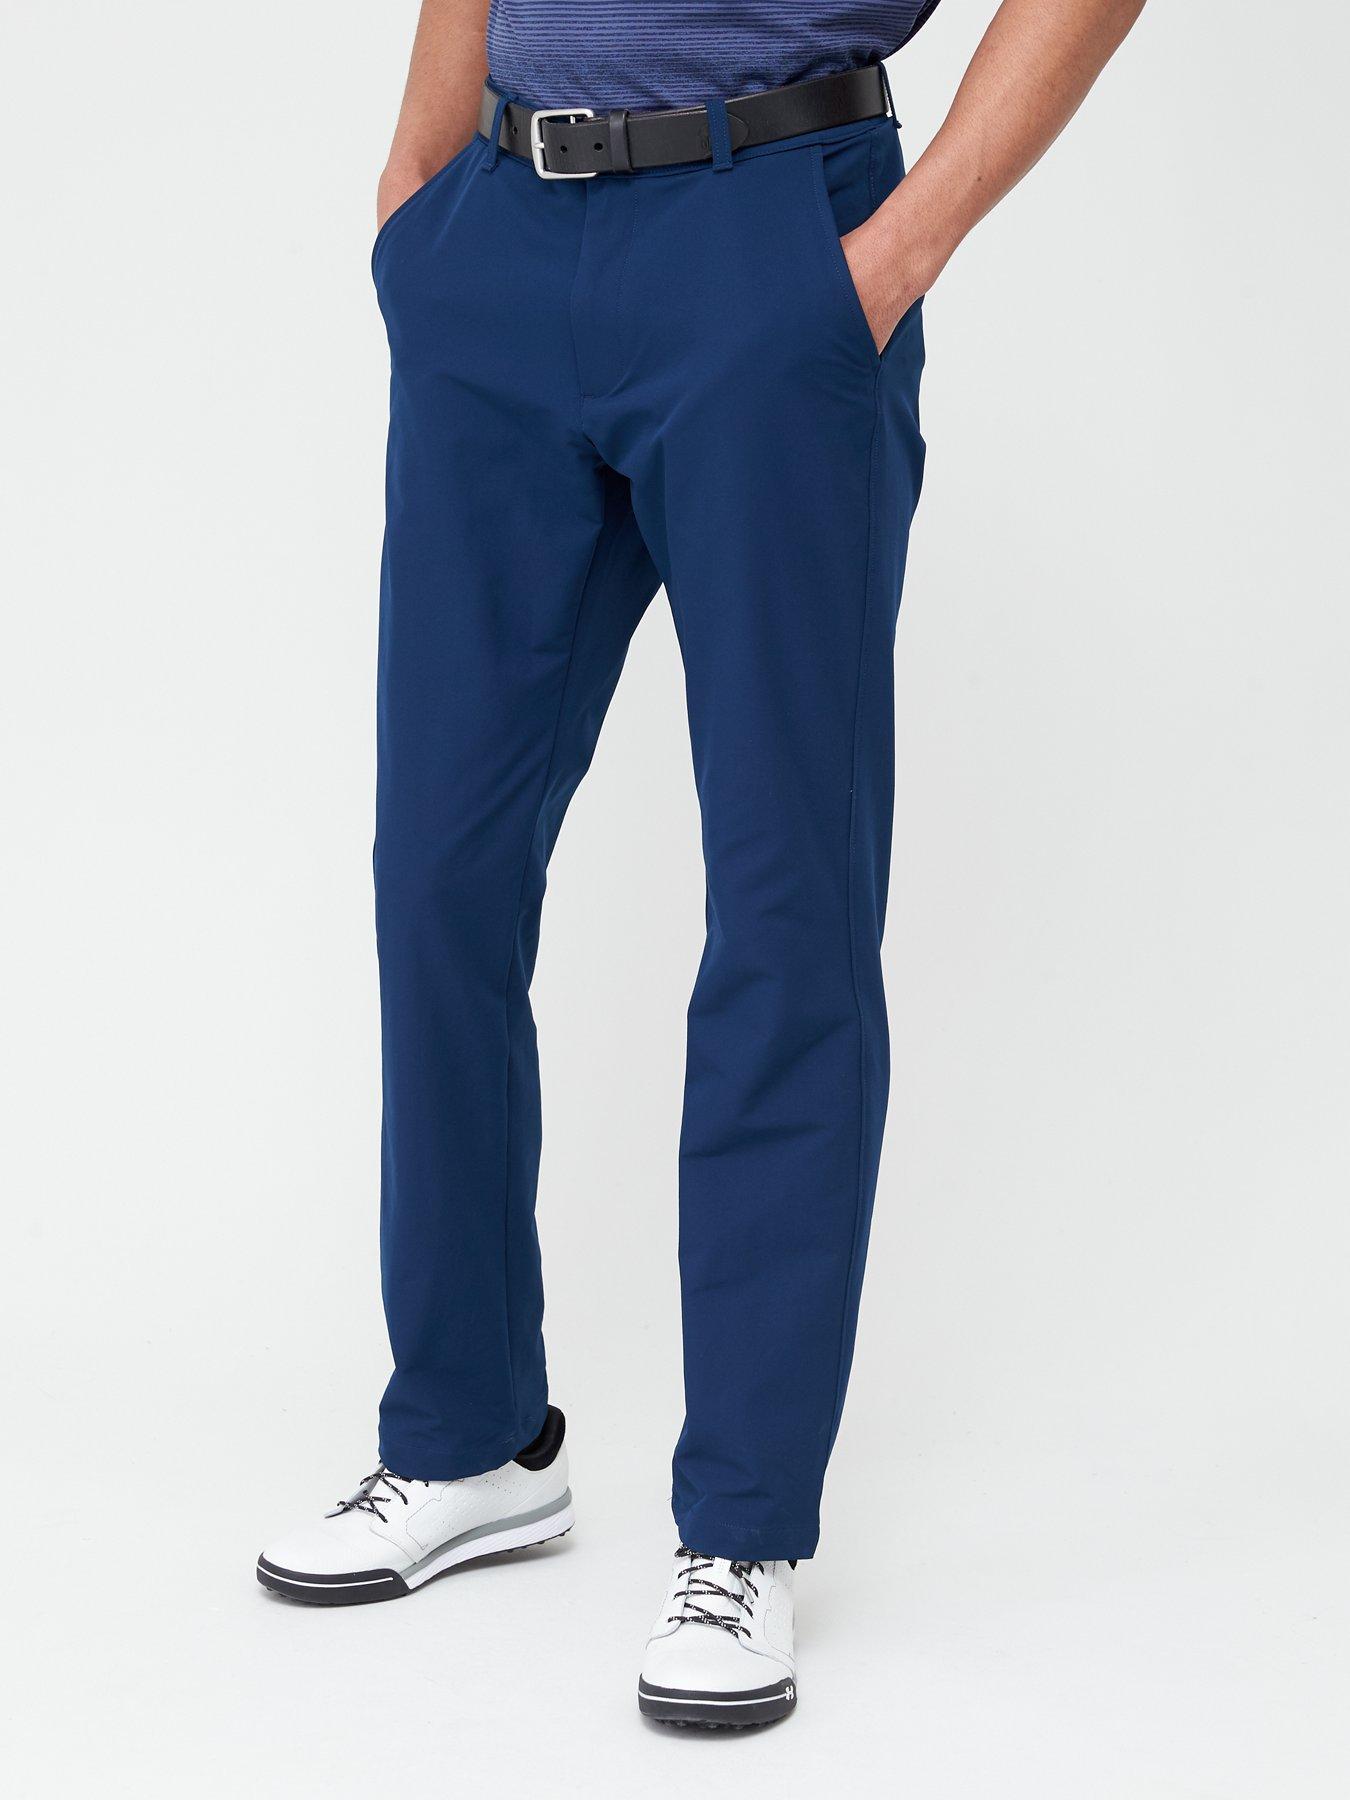 under armour navy tracksuit bottoms